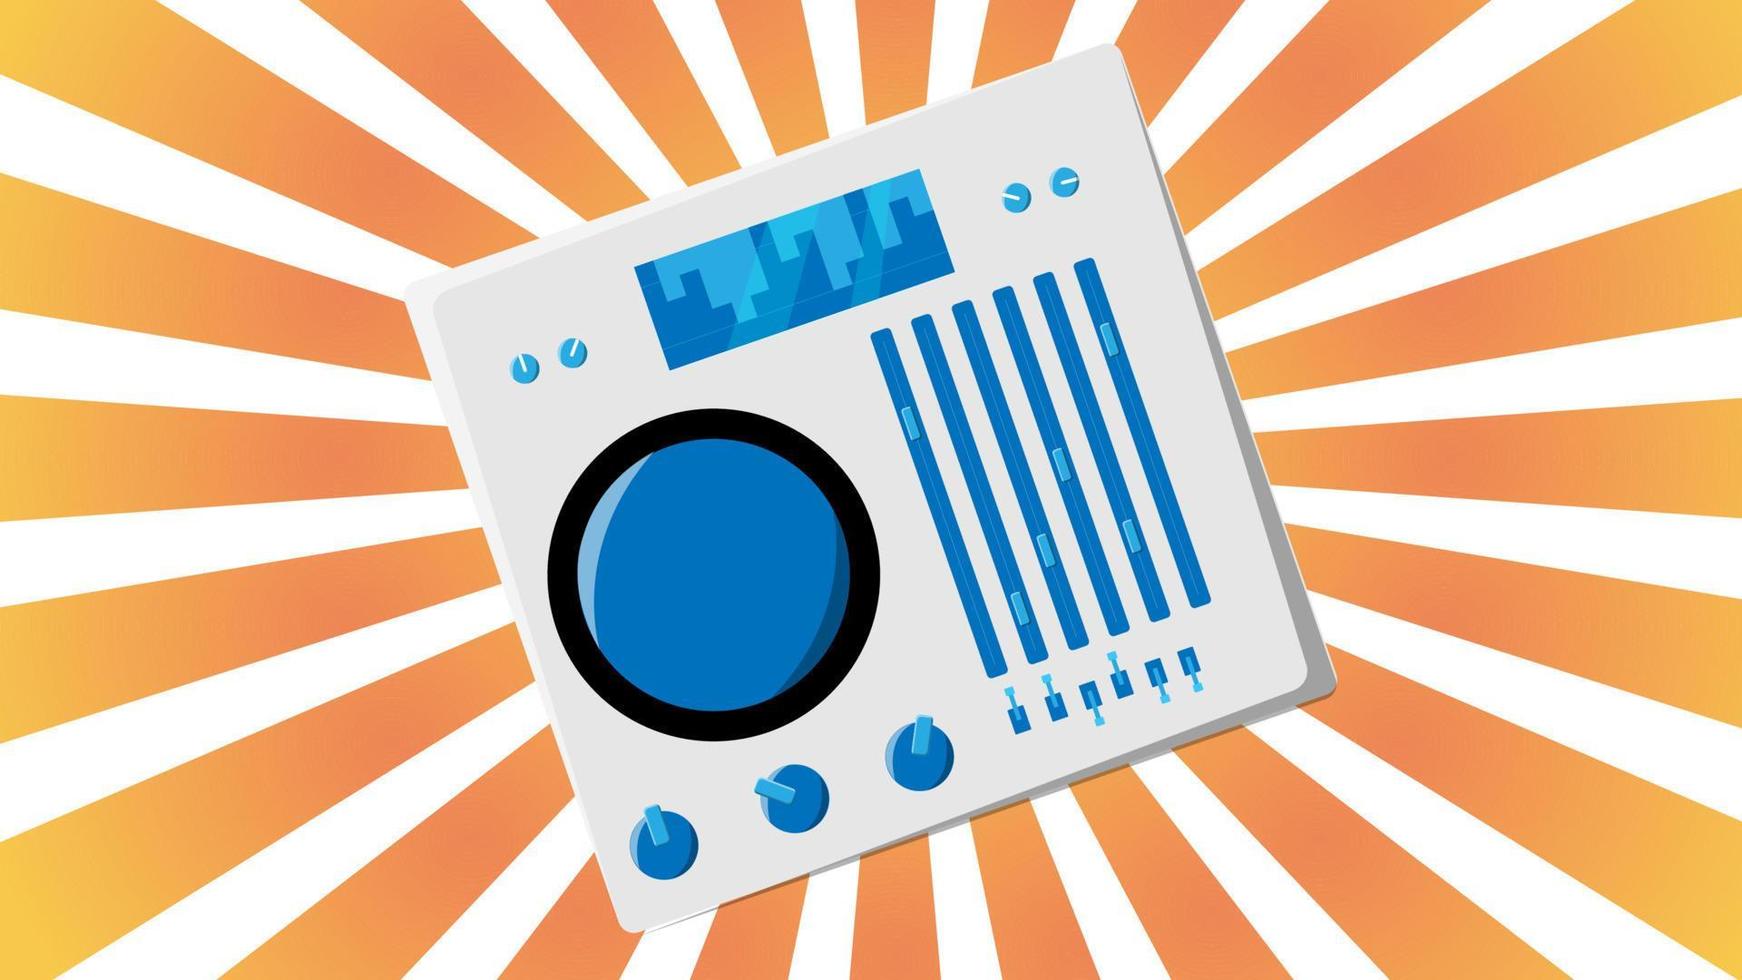 Old retro vintage audio music equipment vinyl dj board with sliders and cranks and buttons from the 70s, 80s, 90s against the background of the orange rays of the sun. Vector illustration